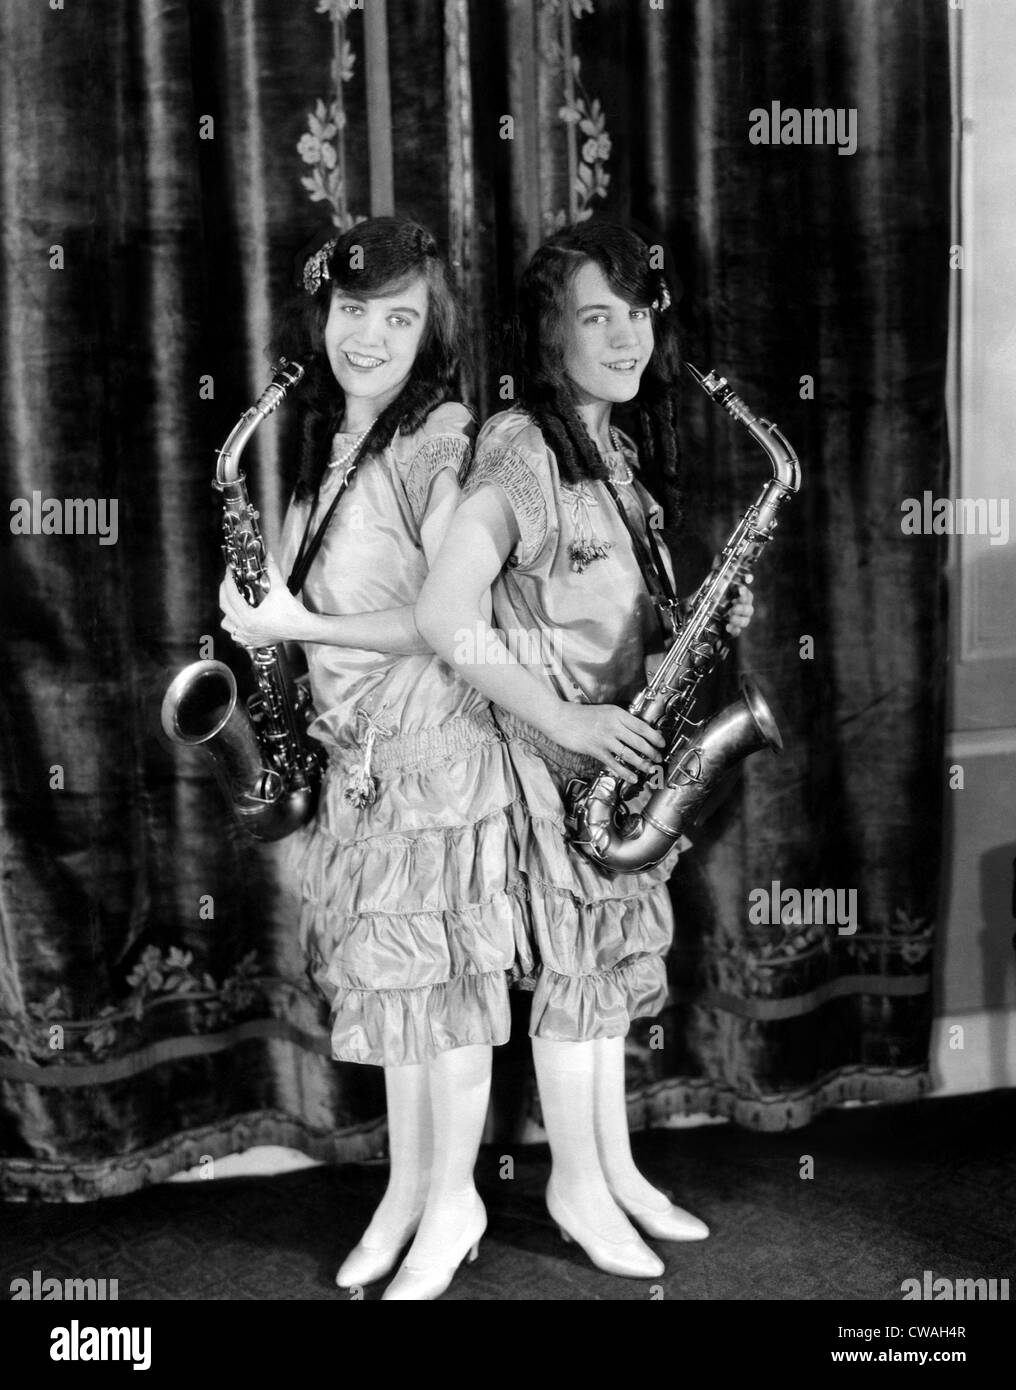 Conjoined twins Daisy and Violet Hilton, at age 16. 1924. Courtesy CSU Archives/Everett Collection. Stock Photo